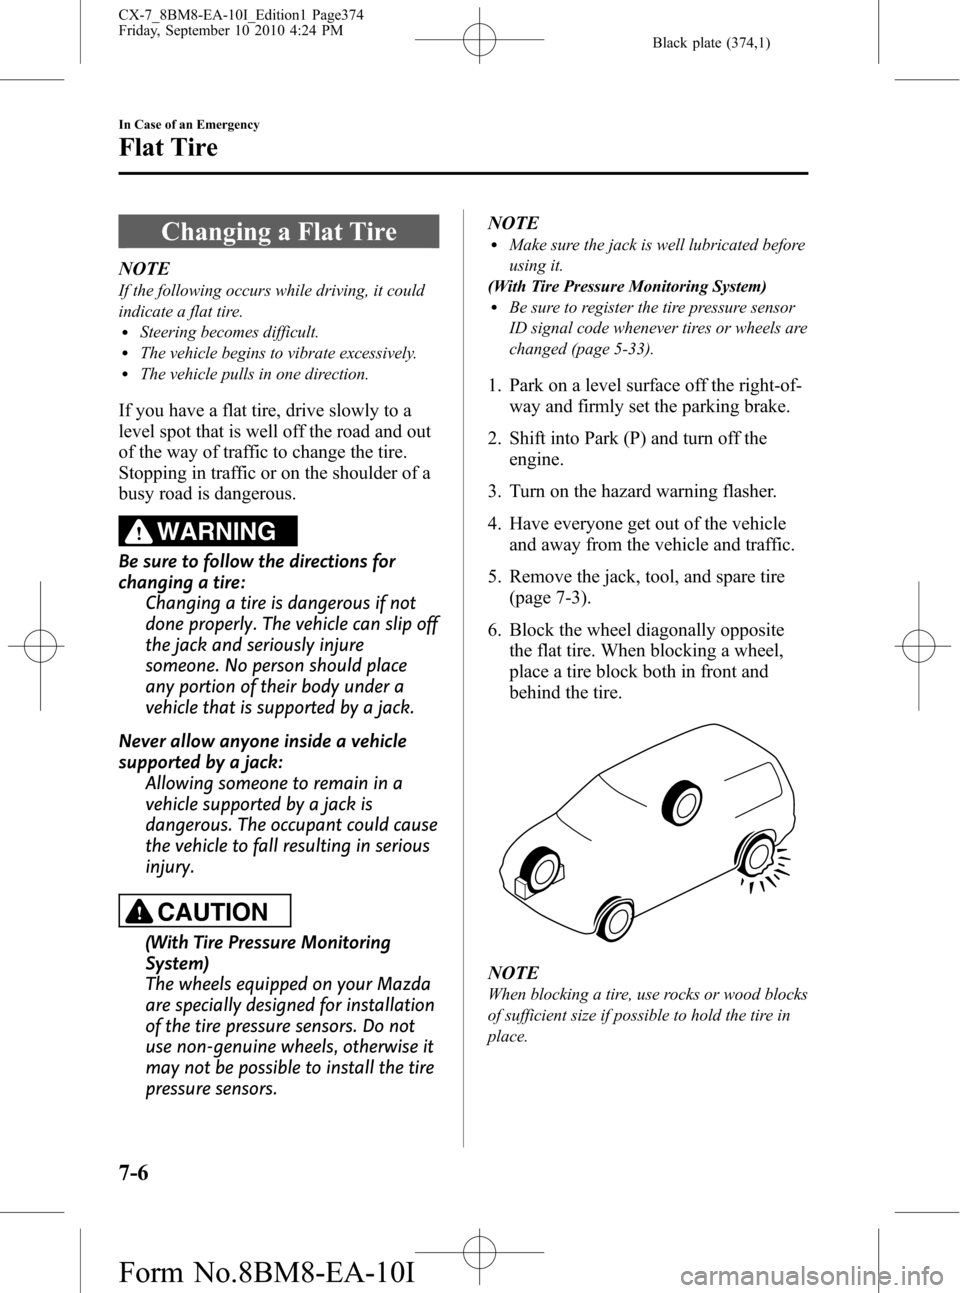 MAZDA MODEL CX-7 2011  Owners Manual (in English) Black plate (374,1)
Changing a Flat Tire
NOTE
If the following occurs while driving, it could
indicate a flat tire.
lSteering becomes difficult.lThe vehicle begins to vibrate excessively.lThe vehicle 